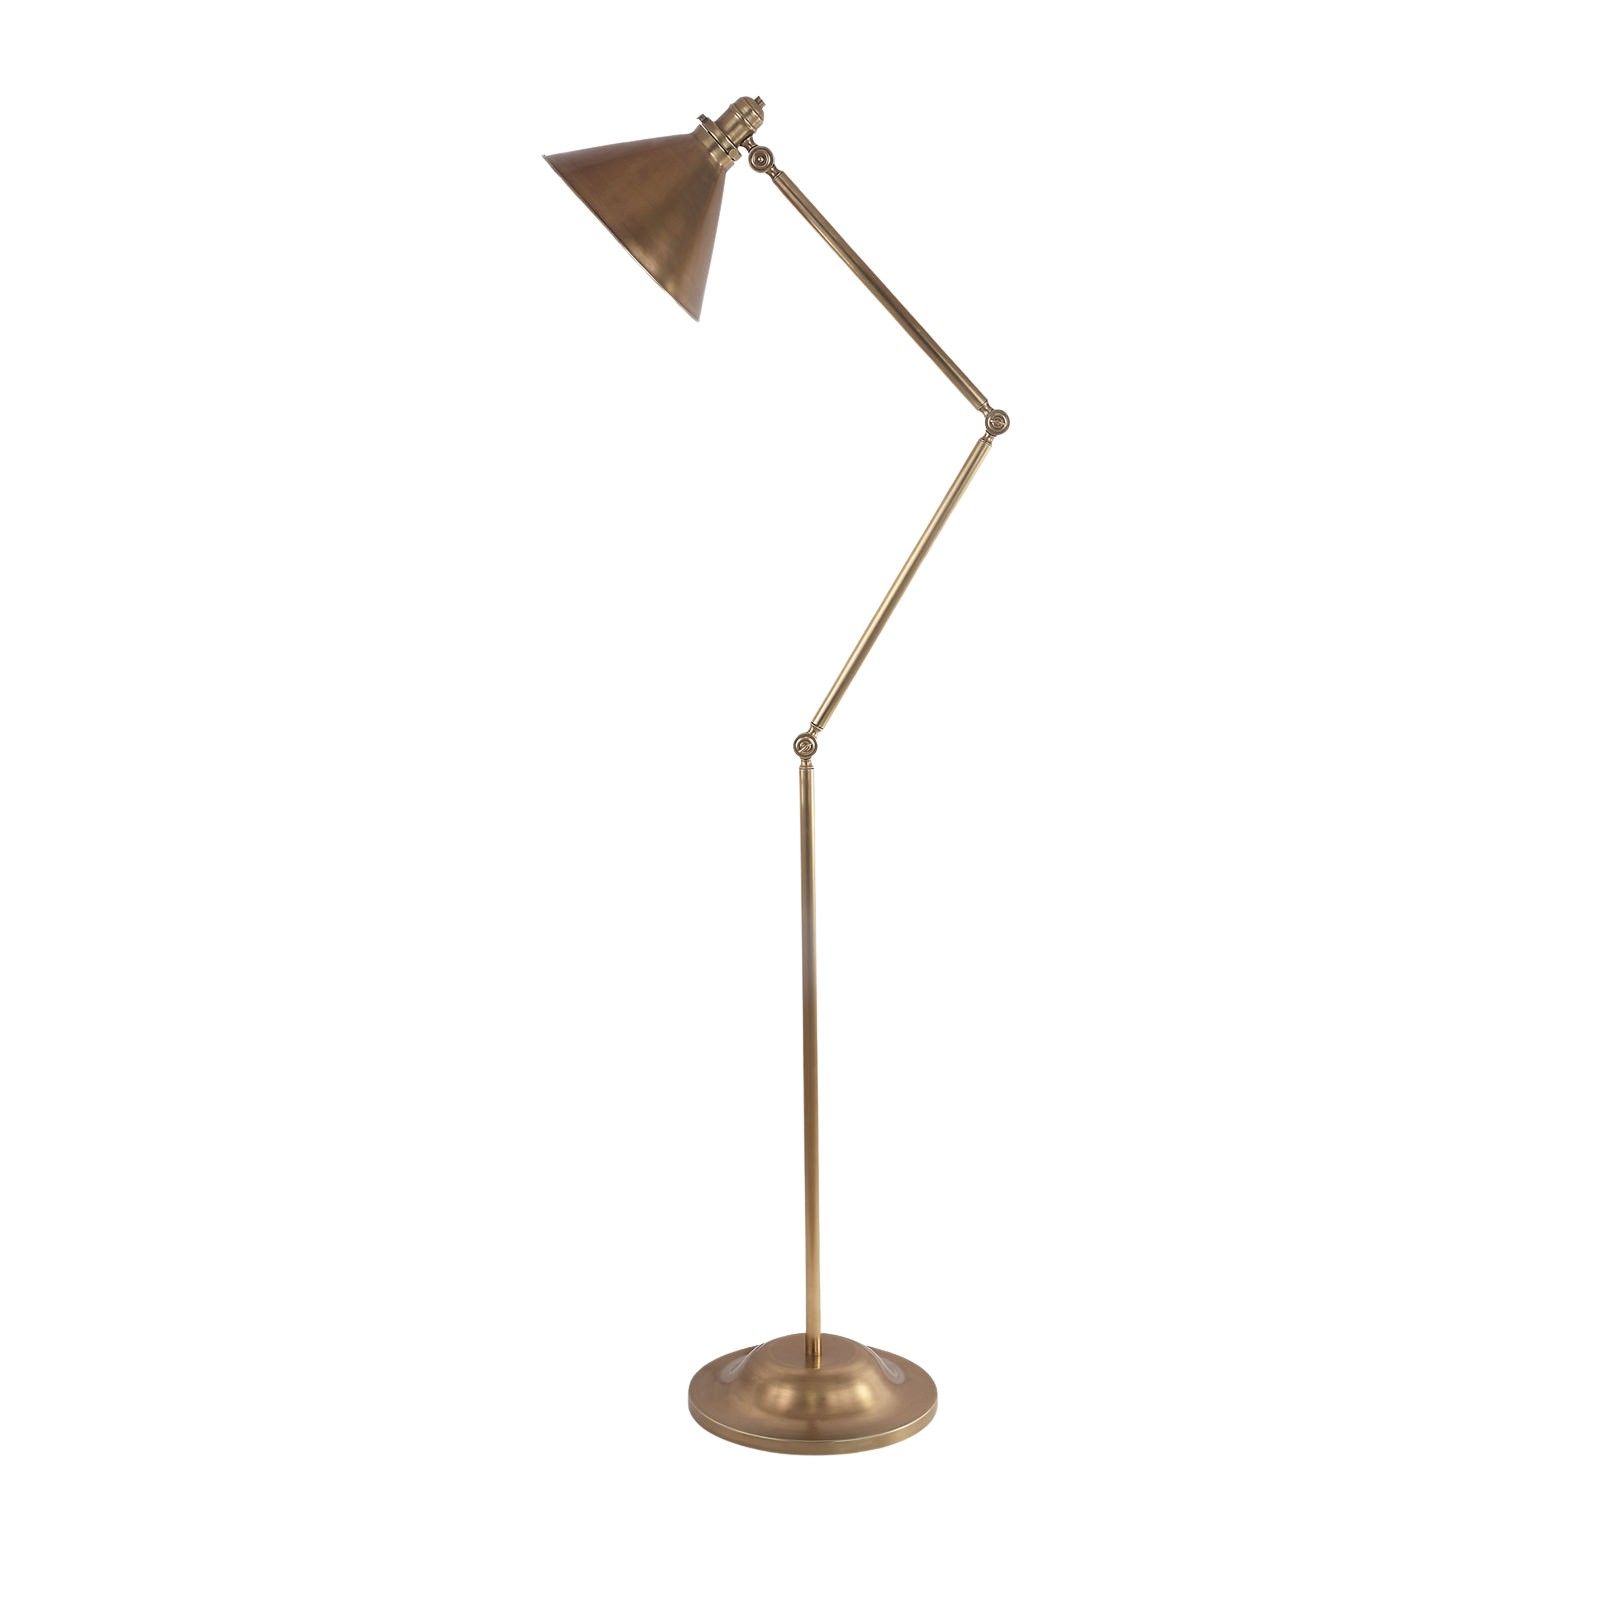 Provence floor lamp in Aged Brass